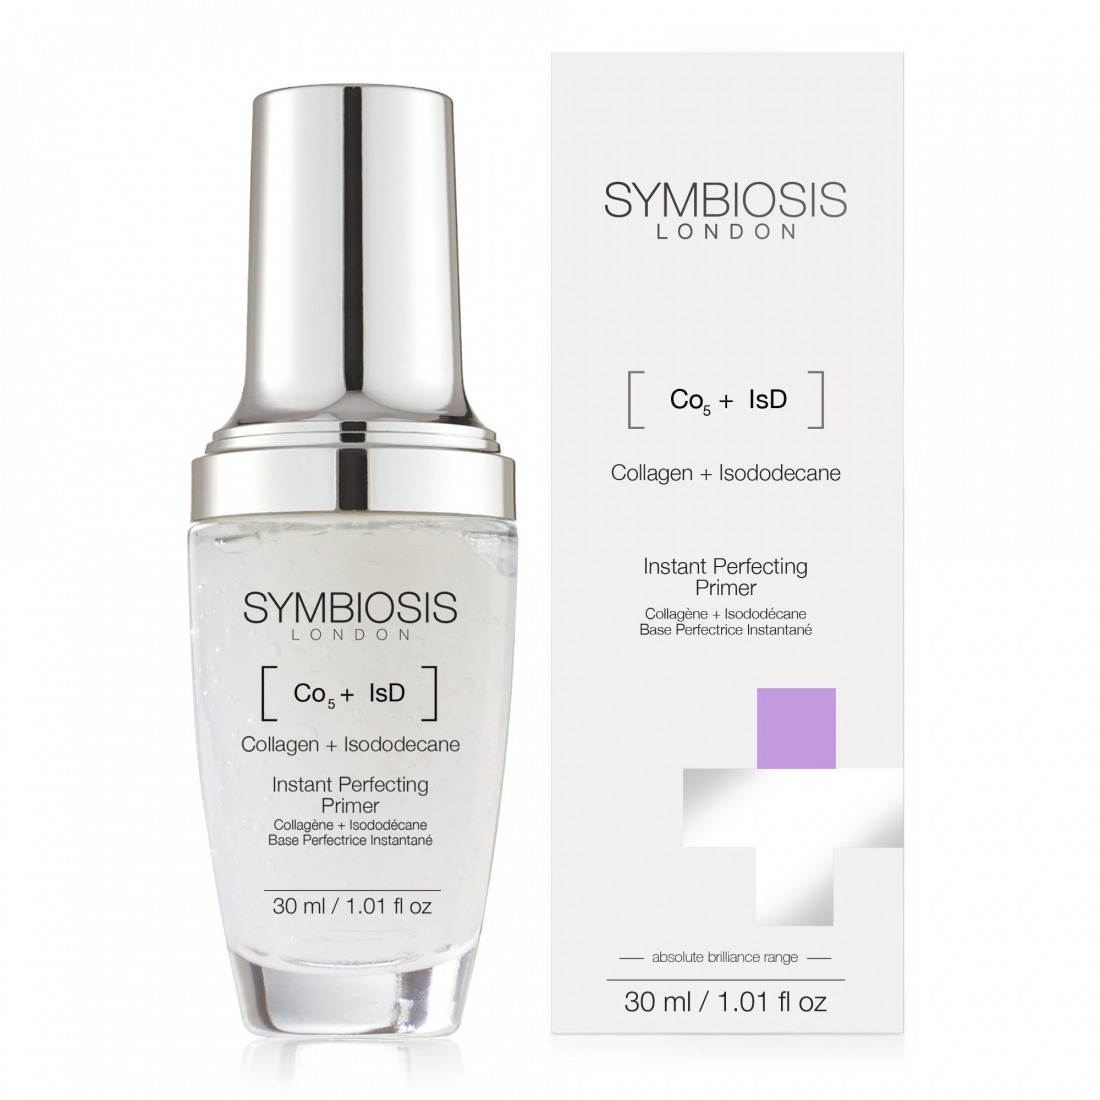 Primer '(Collagen+Isododecane) - Instant Perfecting' - 30 ml